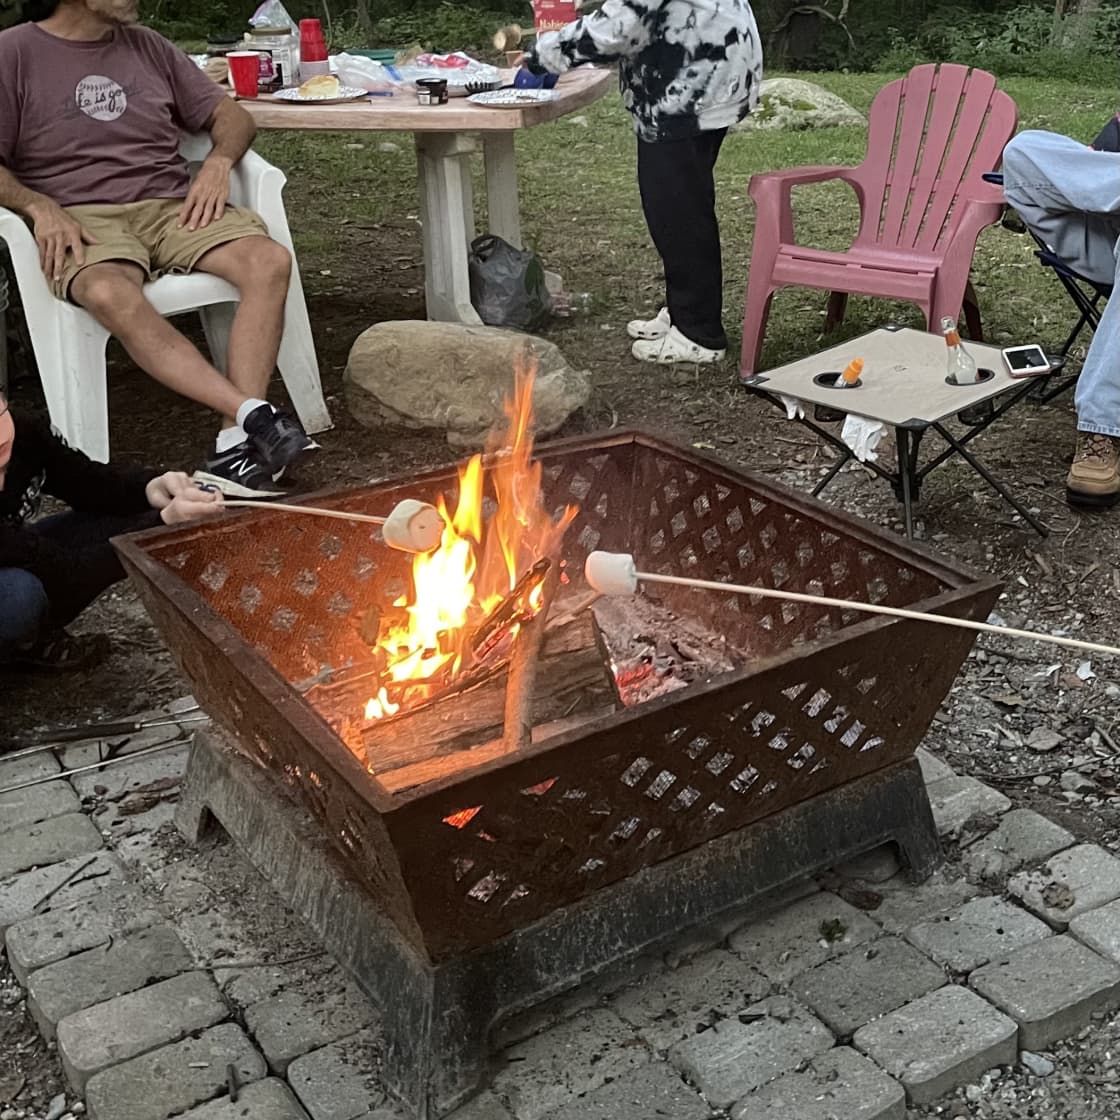 Roasting marshmallows over the fire pit